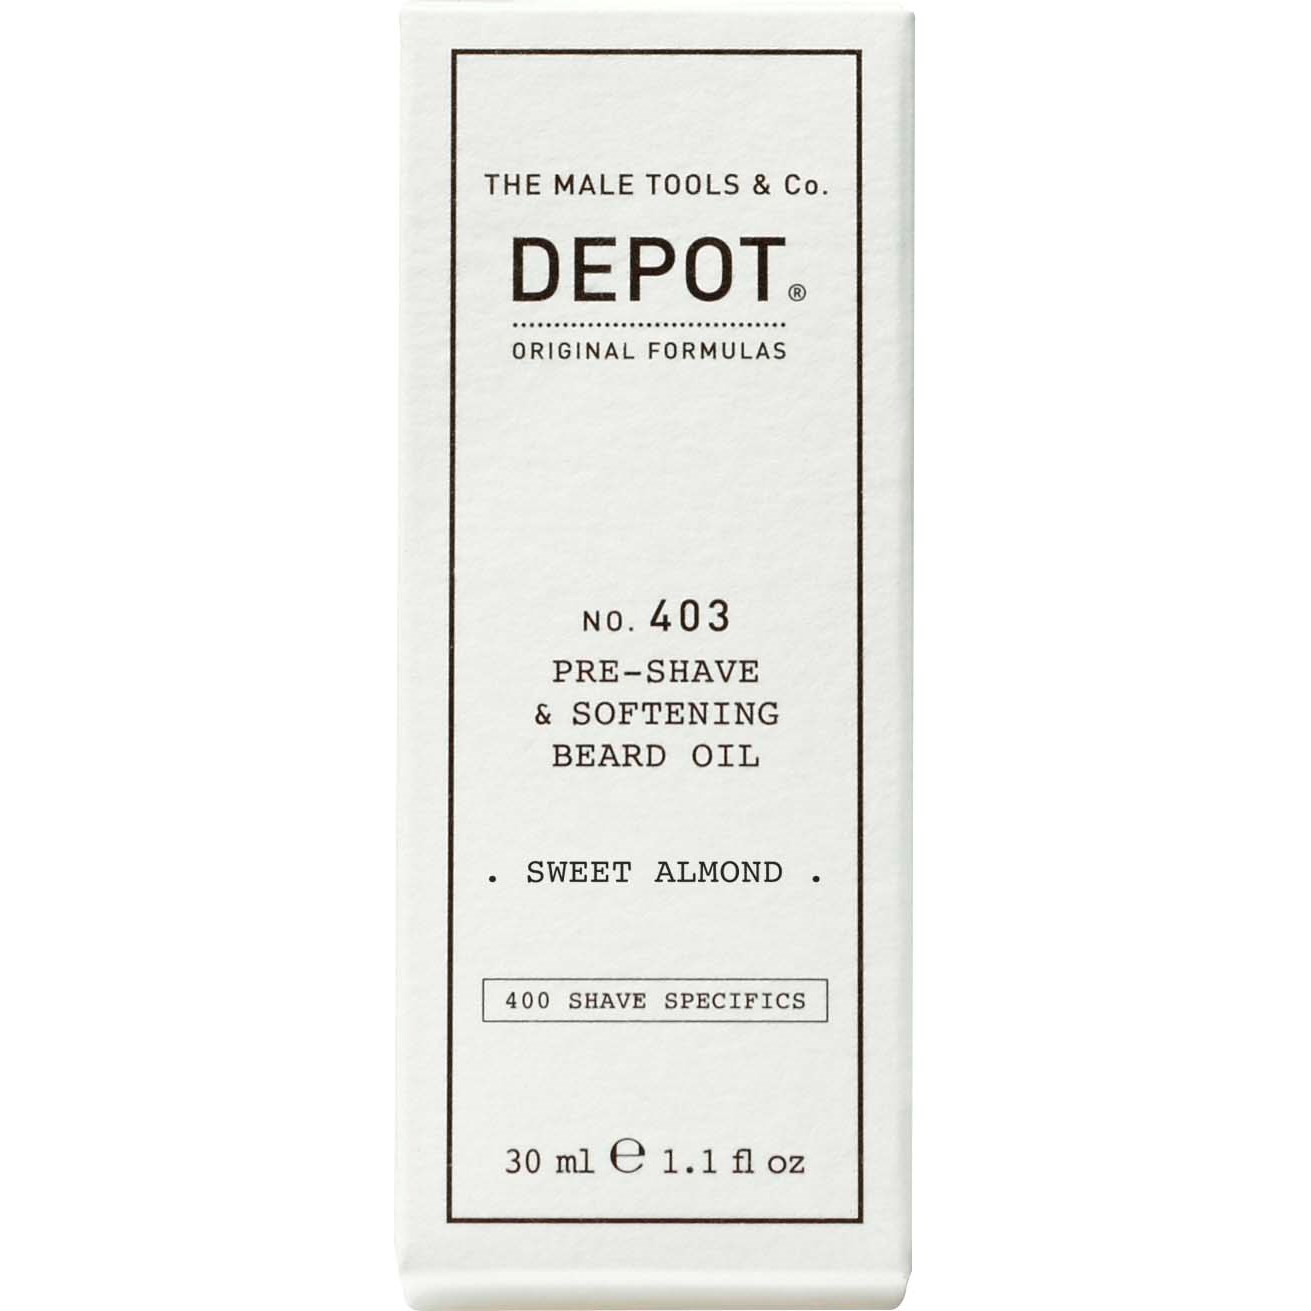 DEPOT MALE TOOLS No. 403 Pre-Shave & Softening Beard Oil Sweet Almond